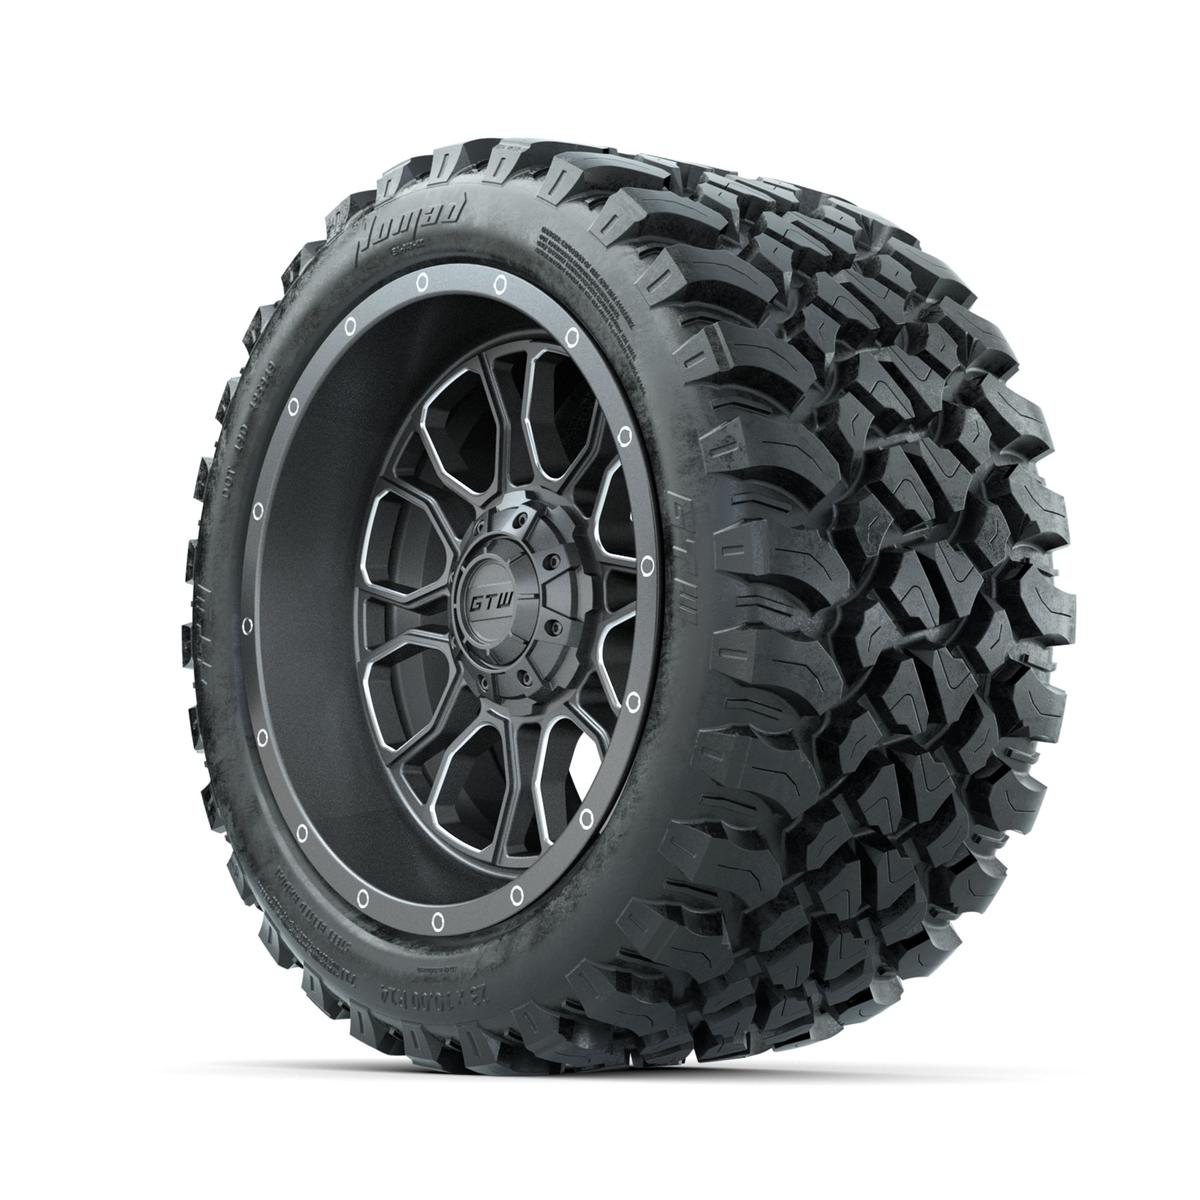 GTW Volt Gunmetal/Machined 14 in Wheels with 23x10-R14 Nomad All Terrain Tires - Full Set